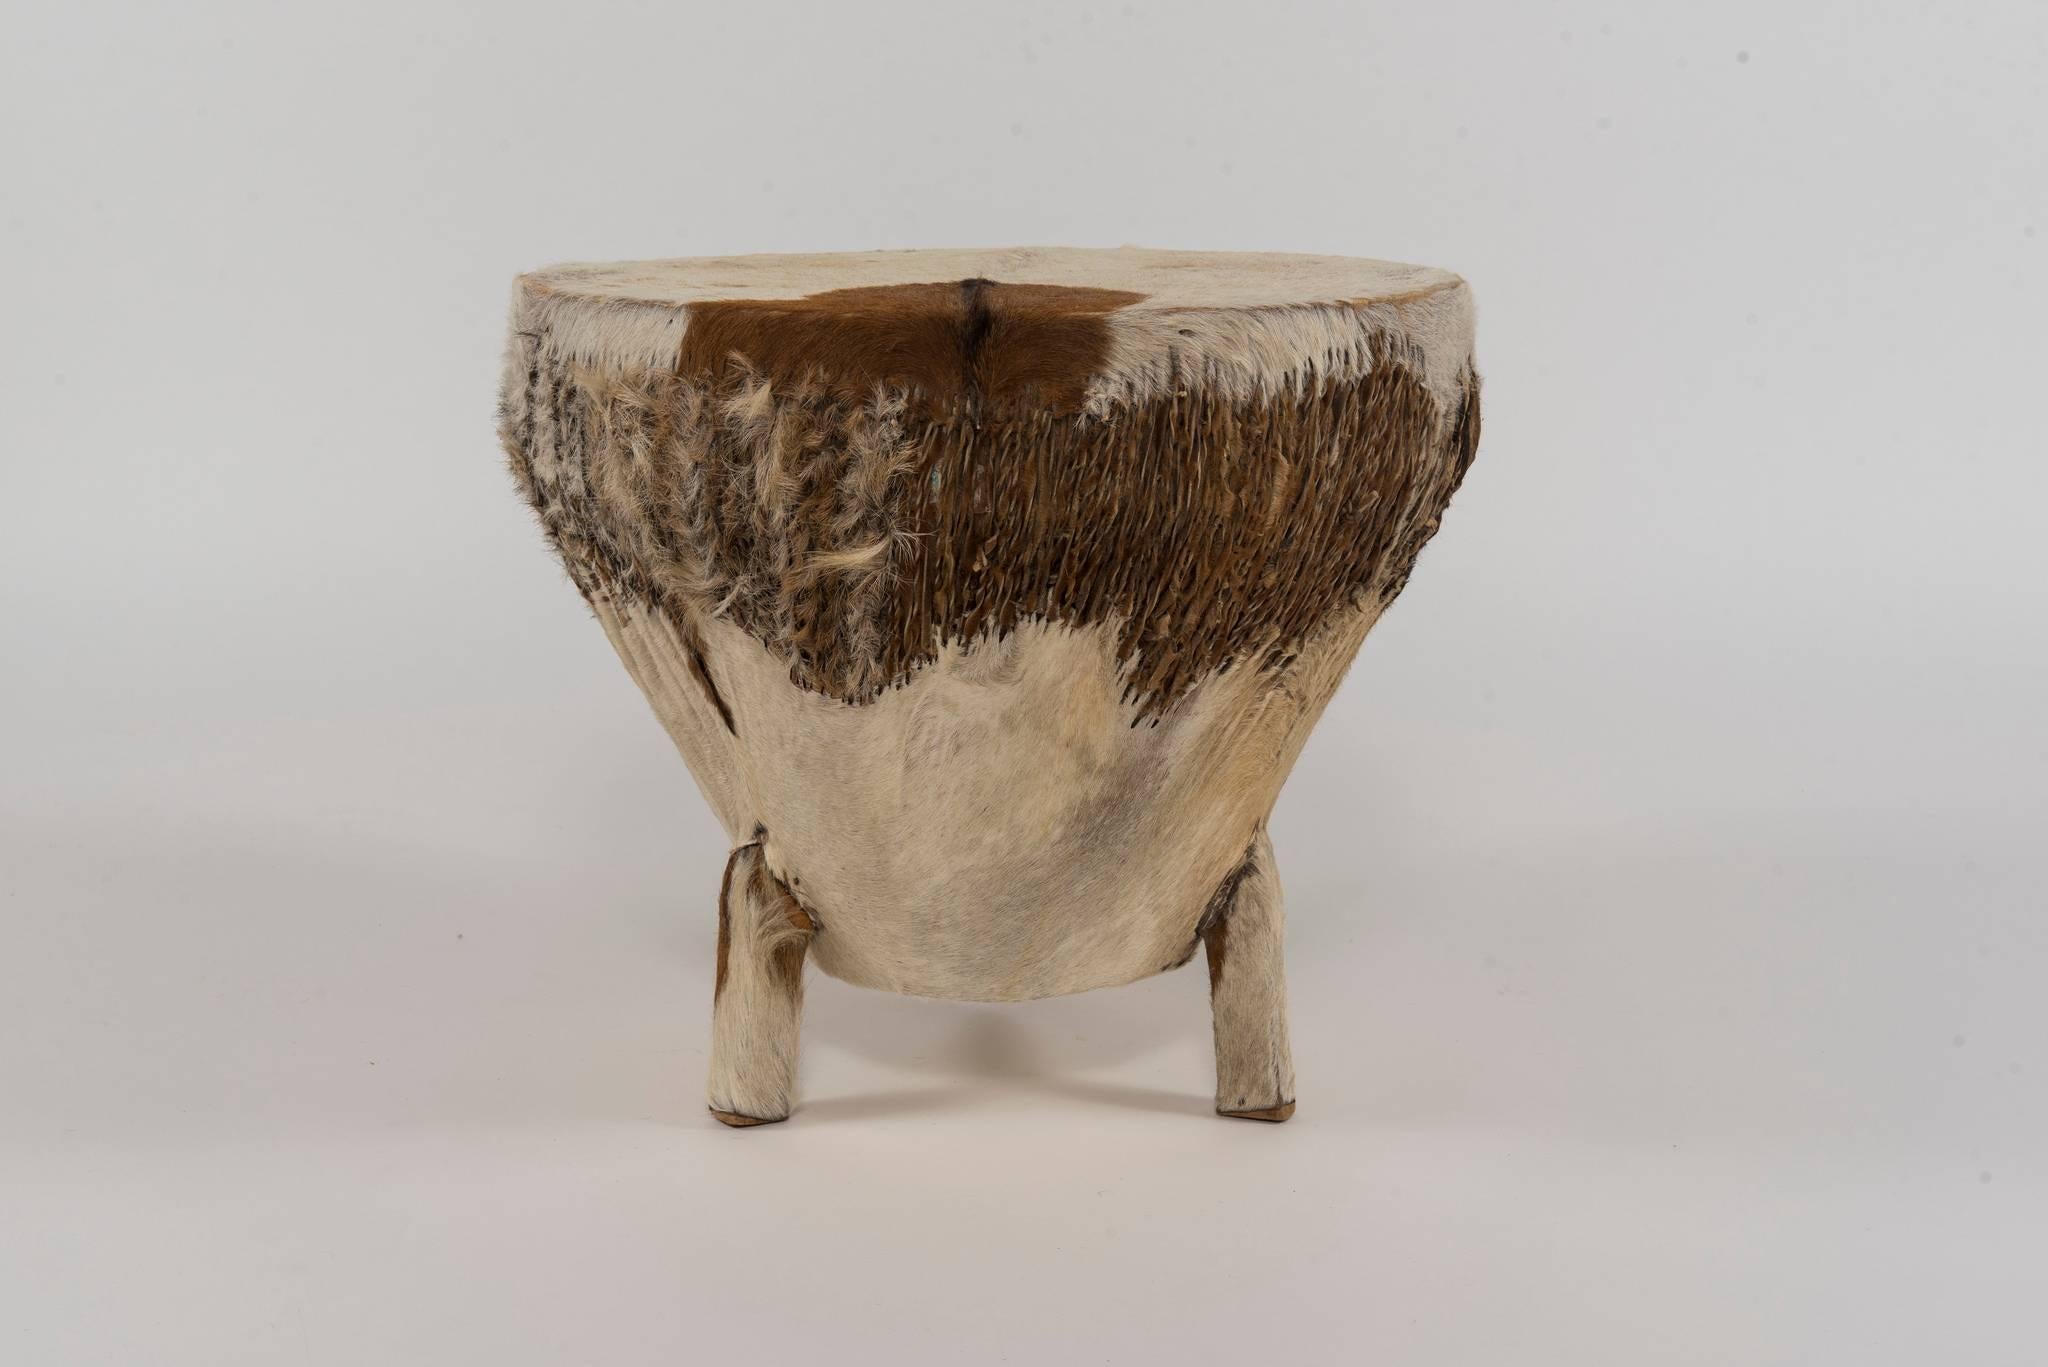 A 1970s African hand-carved hardwood drum made with stretched hides and twisted leather.